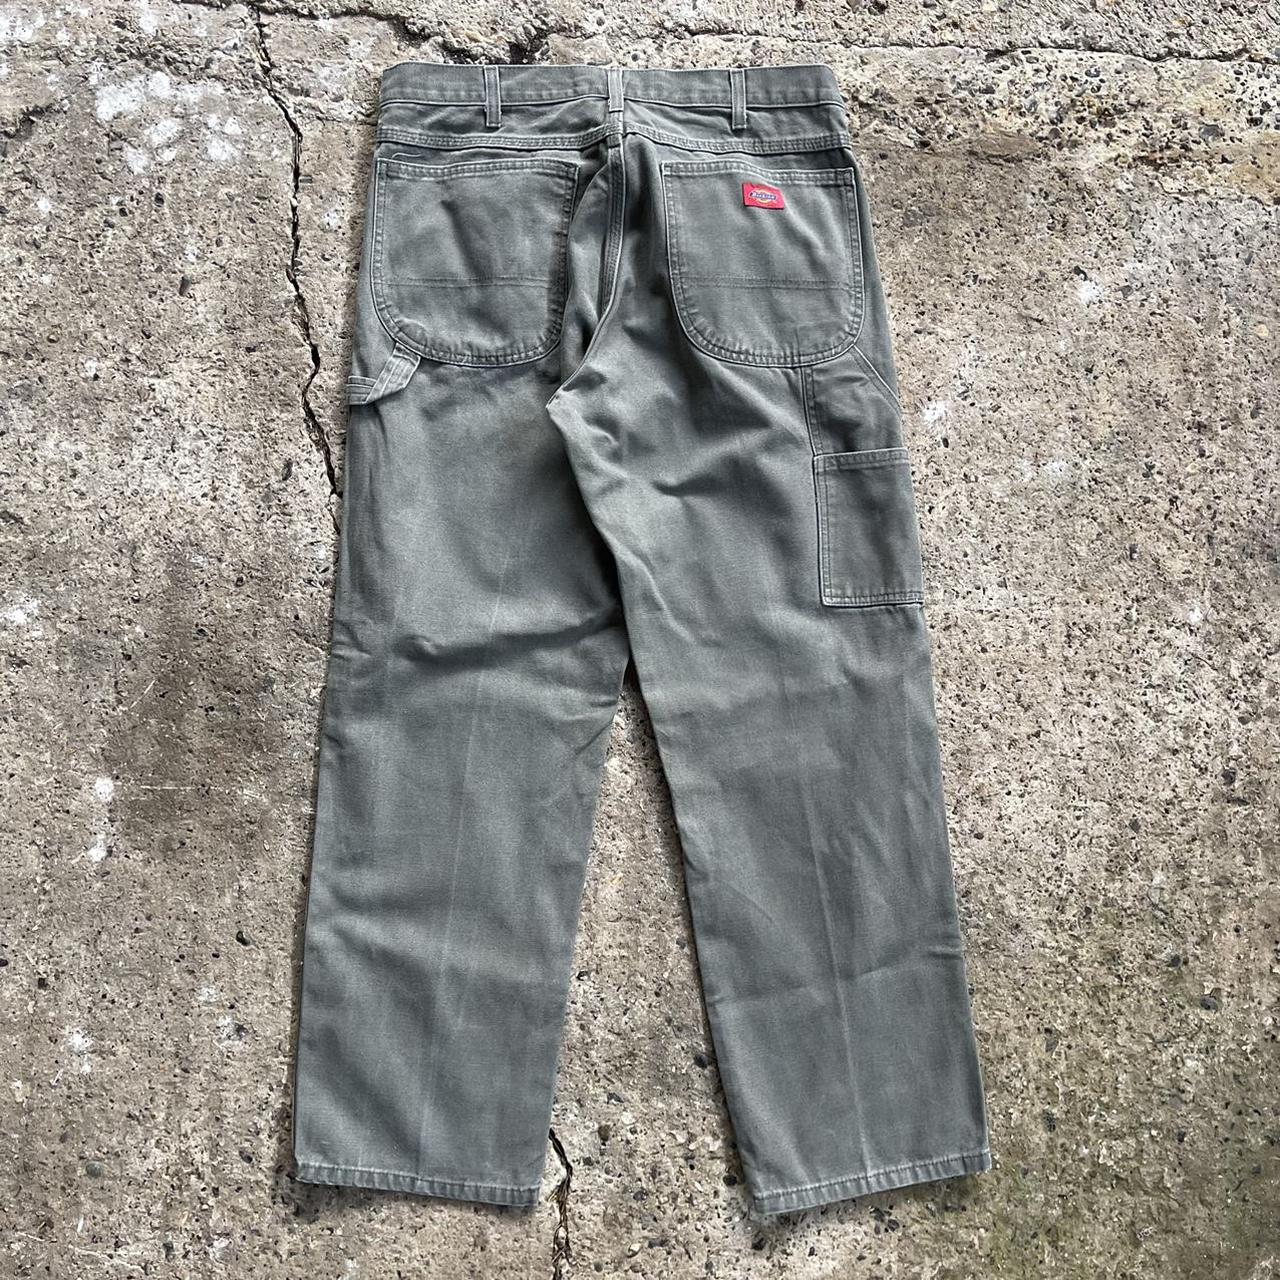 Product Image 3 - Vintage dickies Carpenter Trousers

Faded green